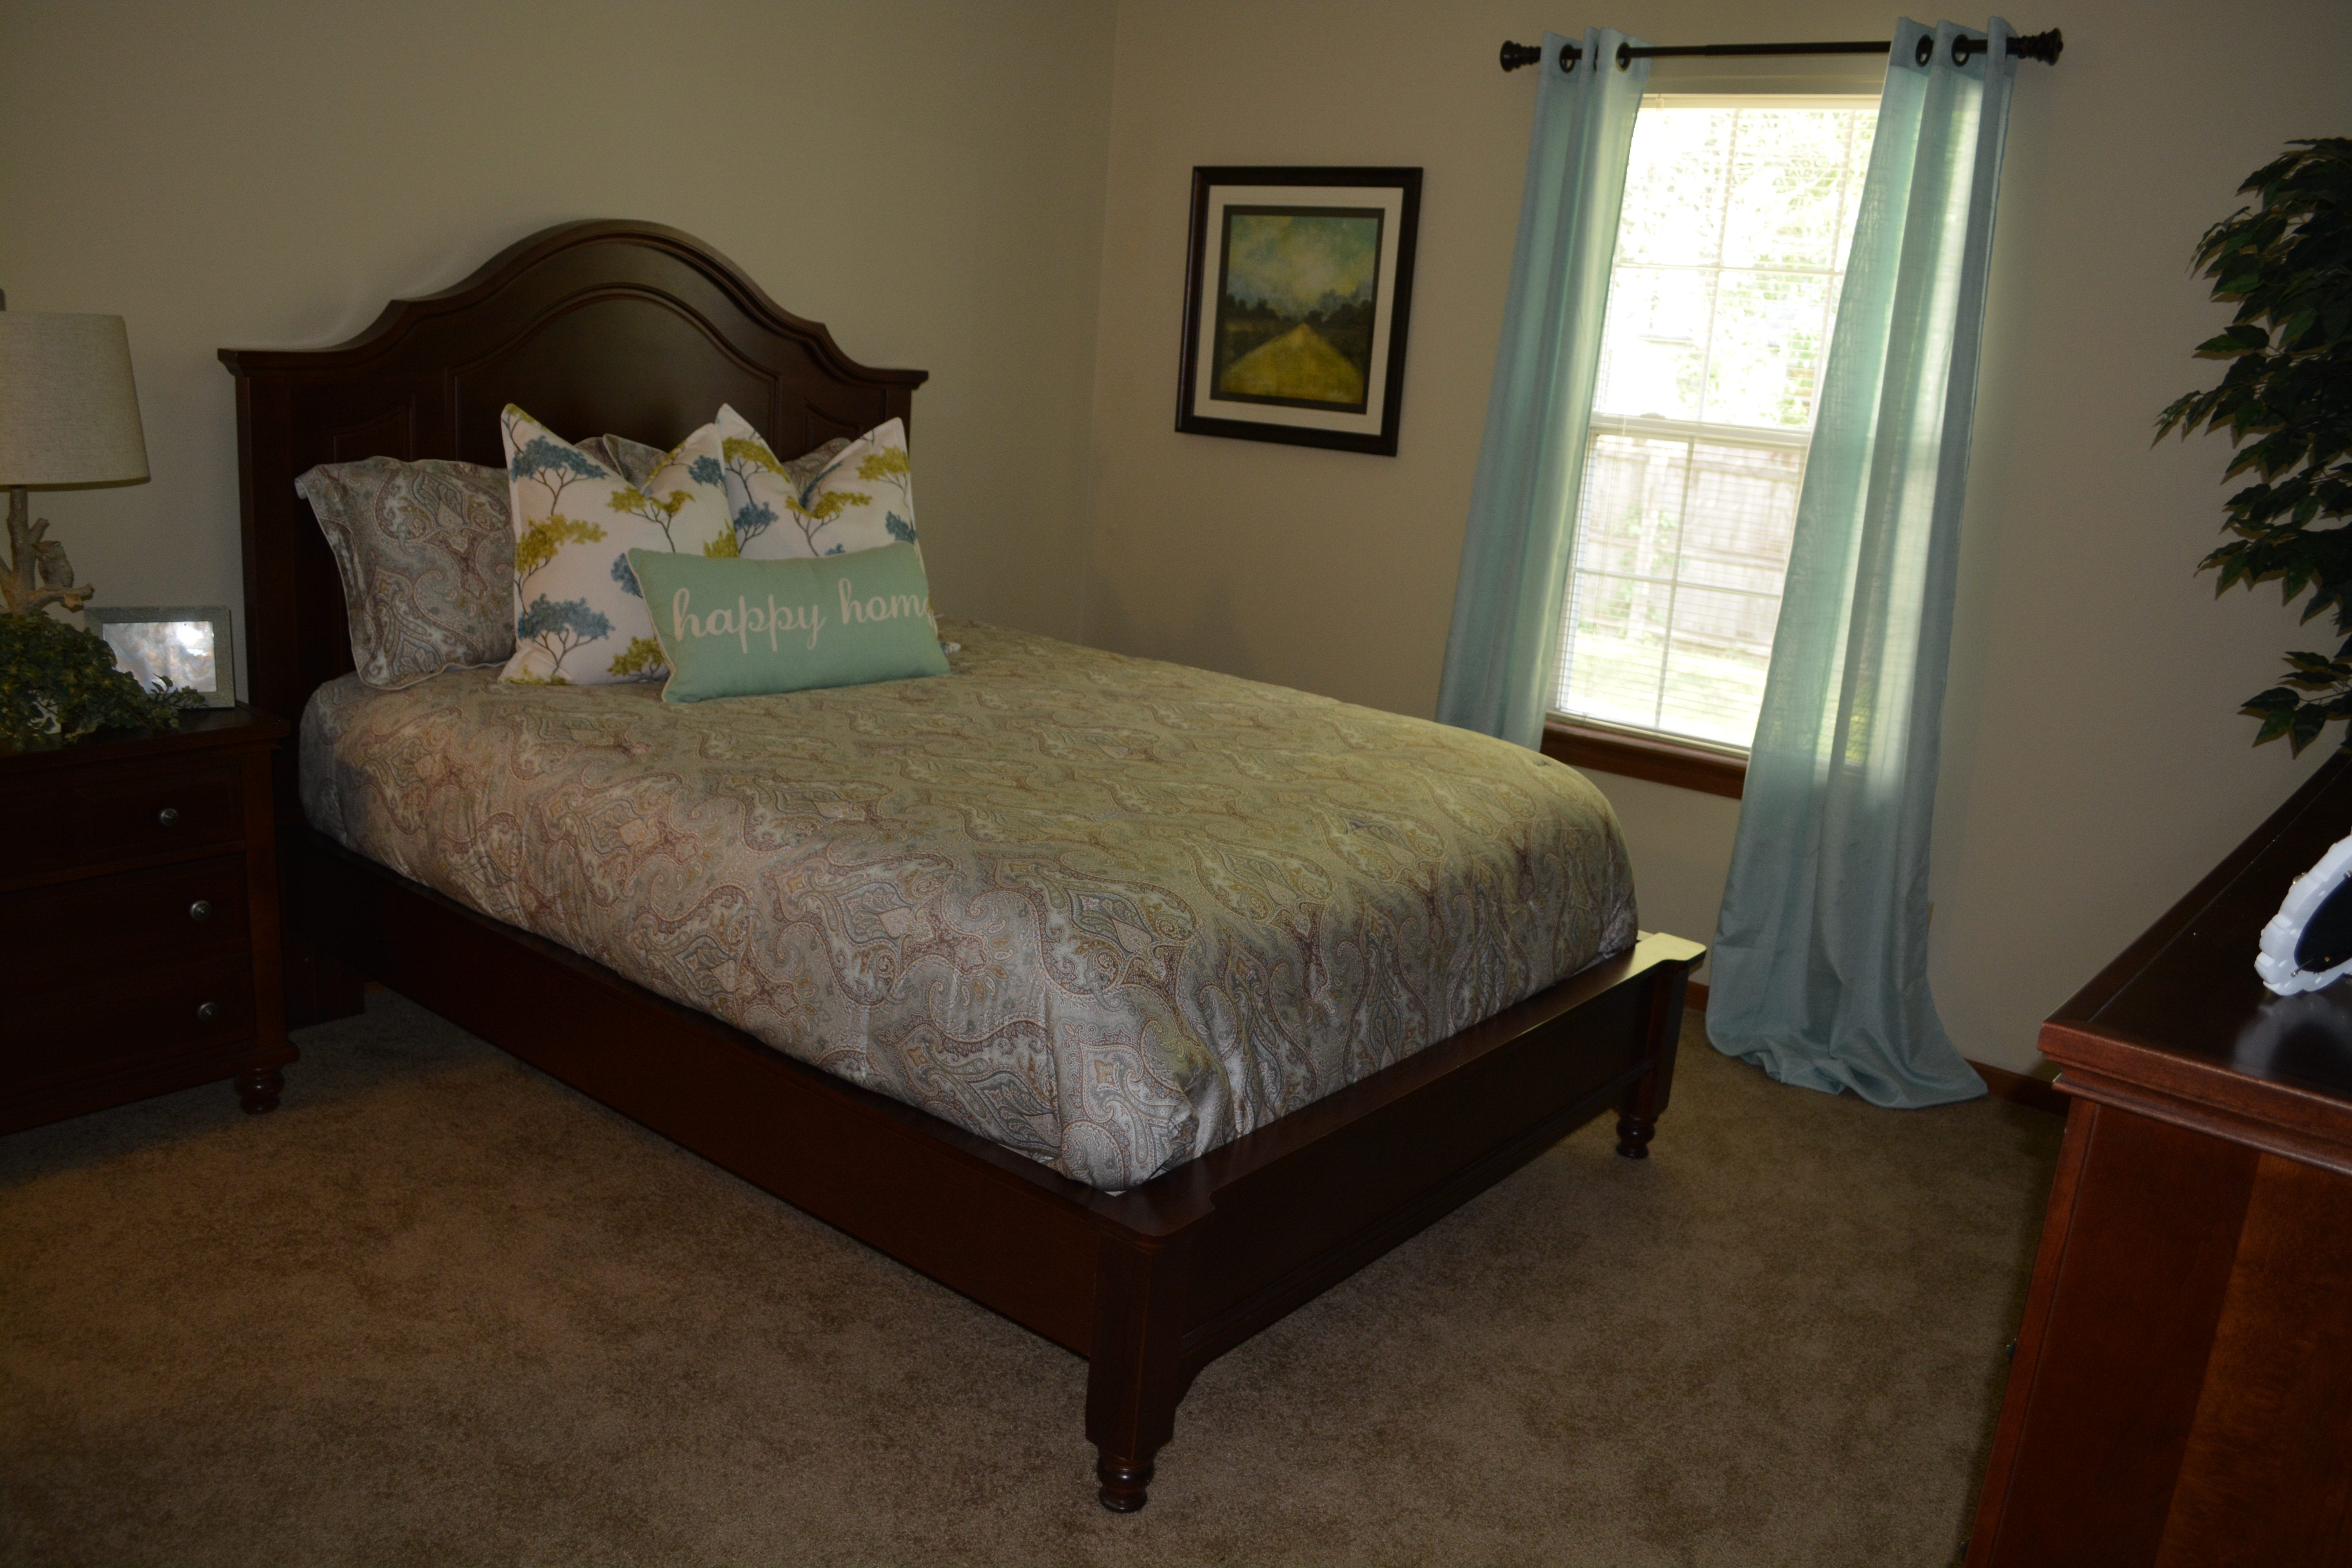 <span  class="uc_style_uc_tiles_grid_image_elementor_uc_items_attribute_title" style="color:#000000;">Interior of bedroom at Spring Mill Meadows Garden Home</span>